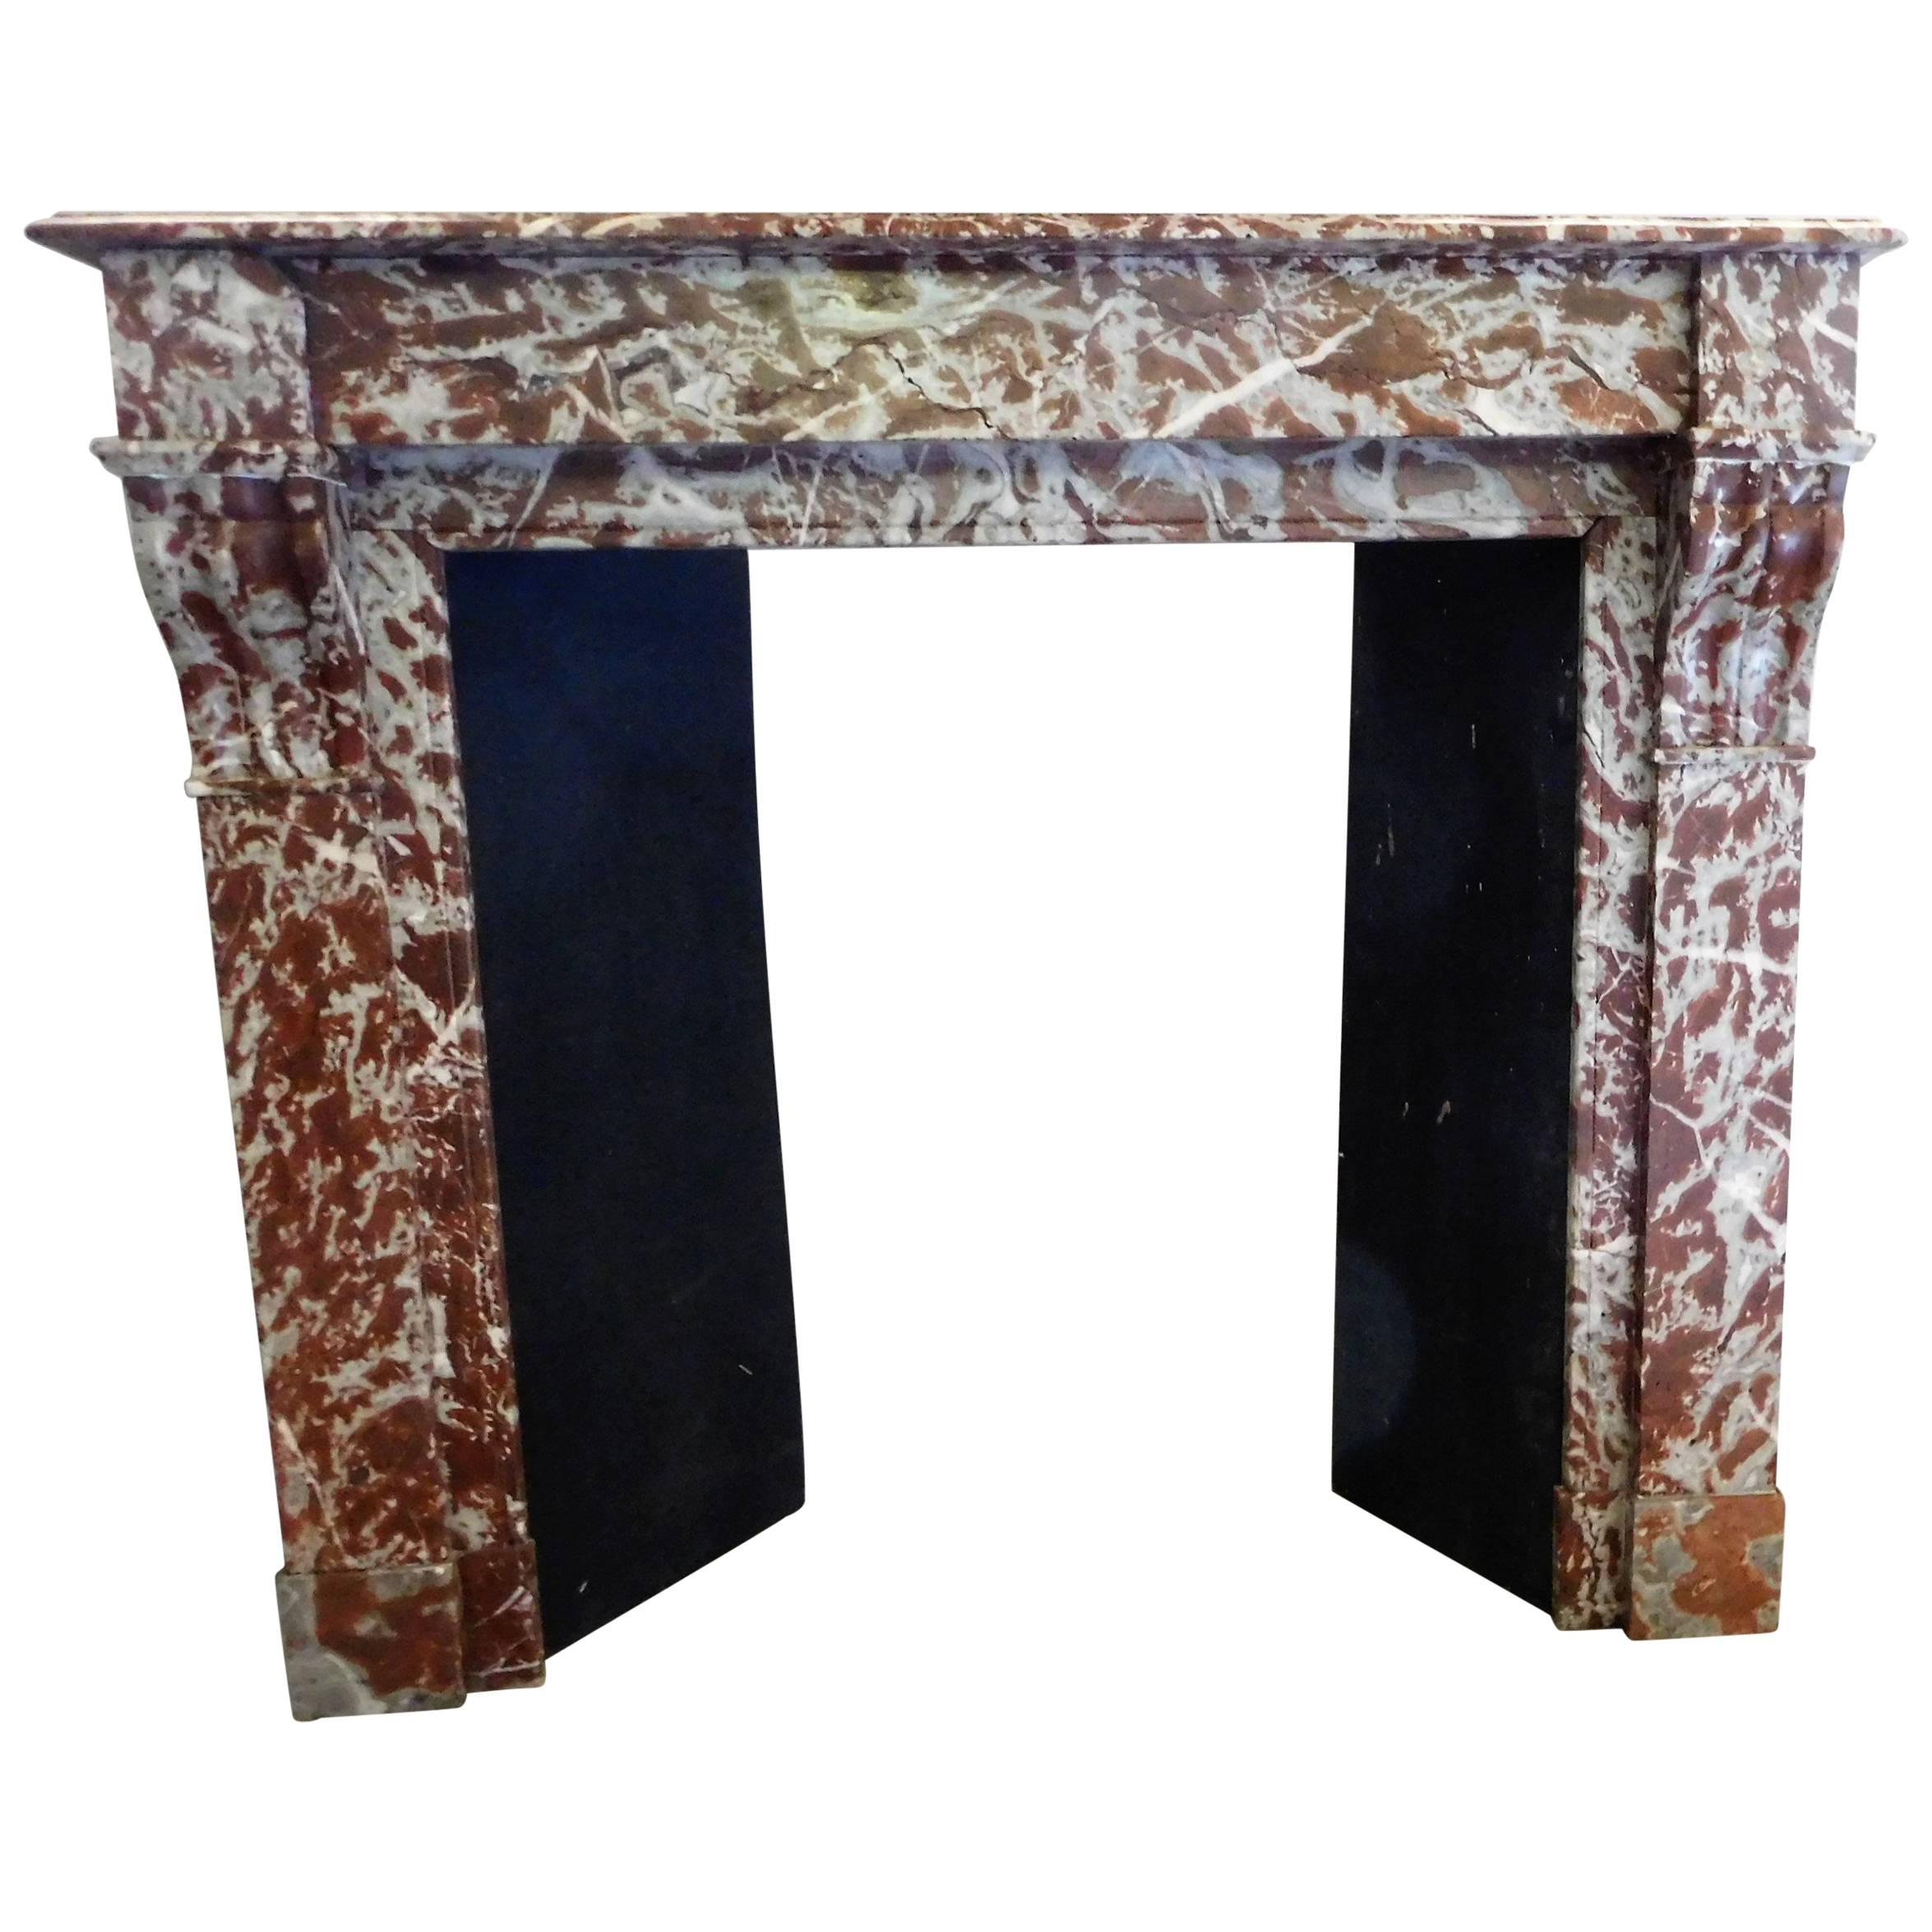 RED MARBLE Rouge du Languedoc 19th. Century For Sale